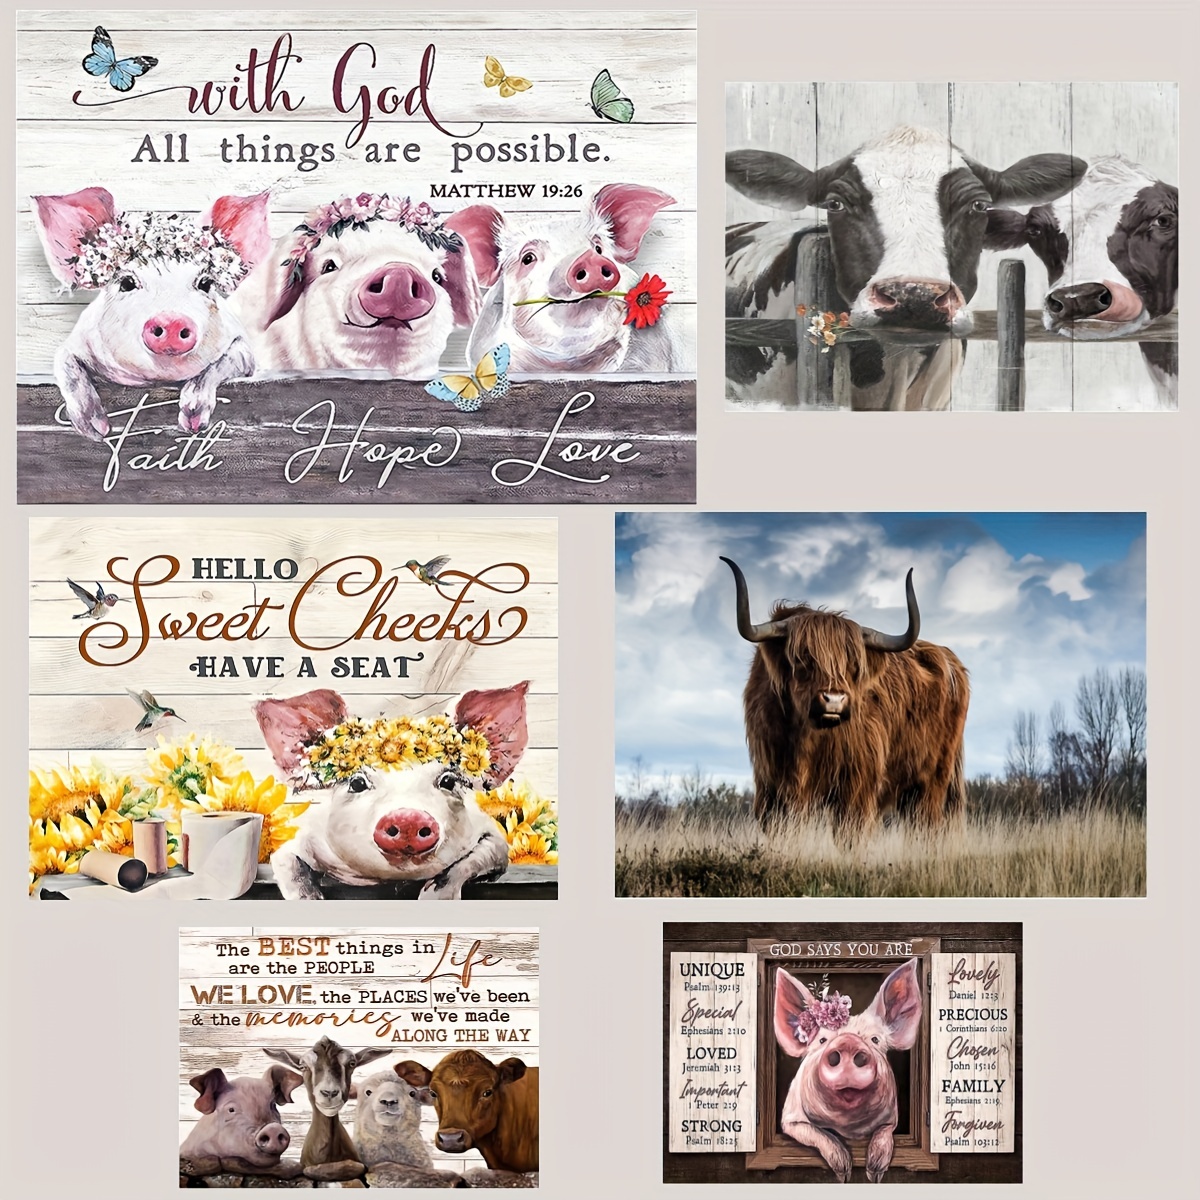 Cute Pig Canvas Wall Art For Home Decor Rustic Farmhouse Style Modern  Prints For Bathroom, Bedroom, Living Room, Kitchen, And Office Funny Piggy  Pictures God Says You Are